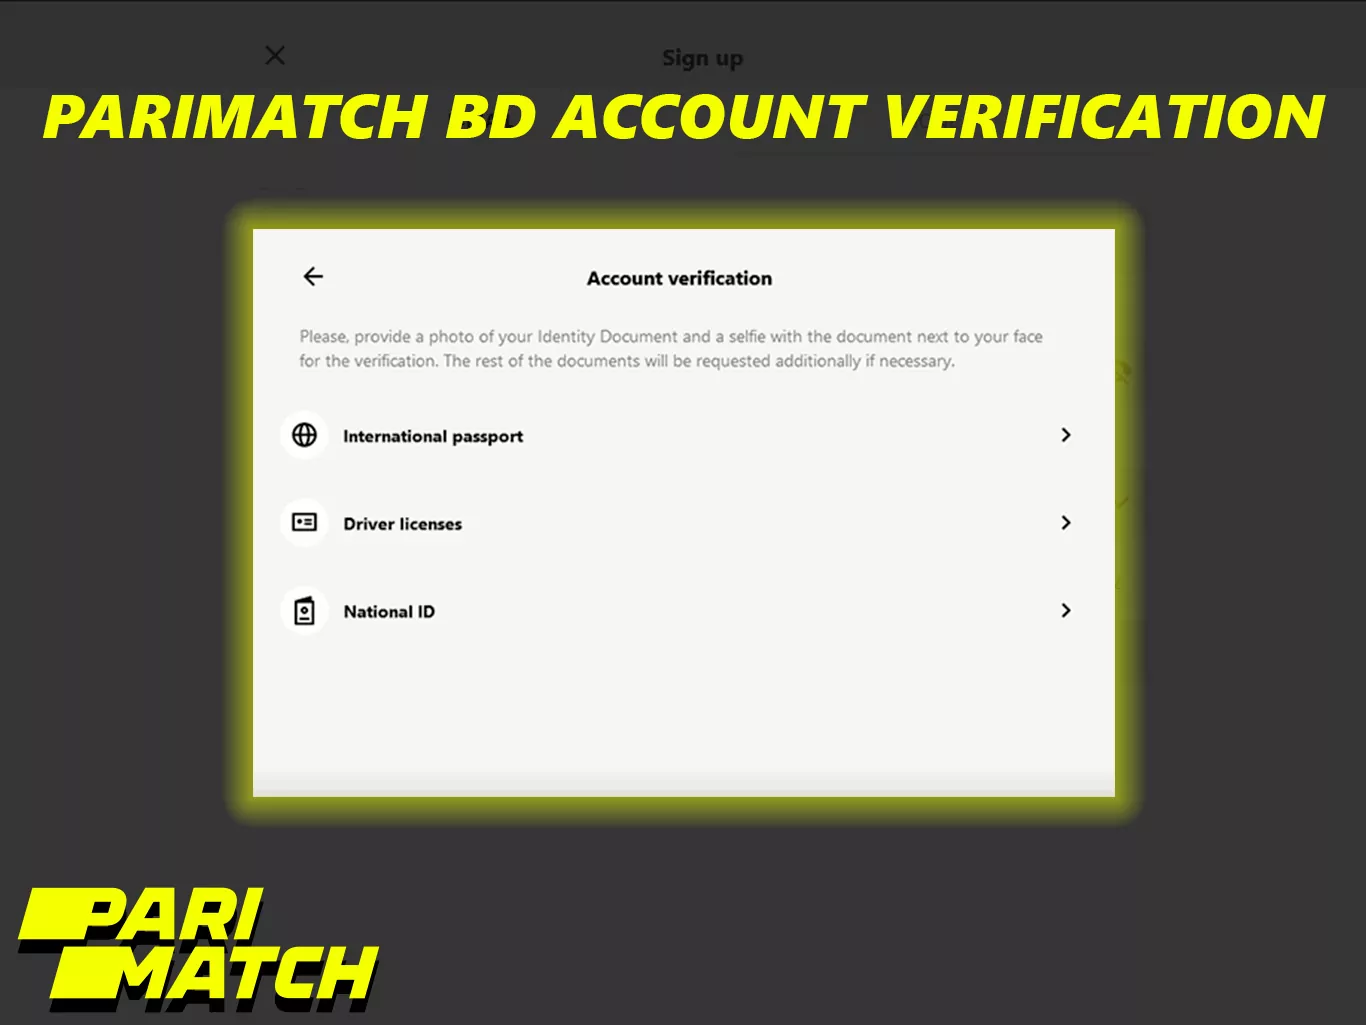 To receive the money funds, you should confirm your Parimatch ID.